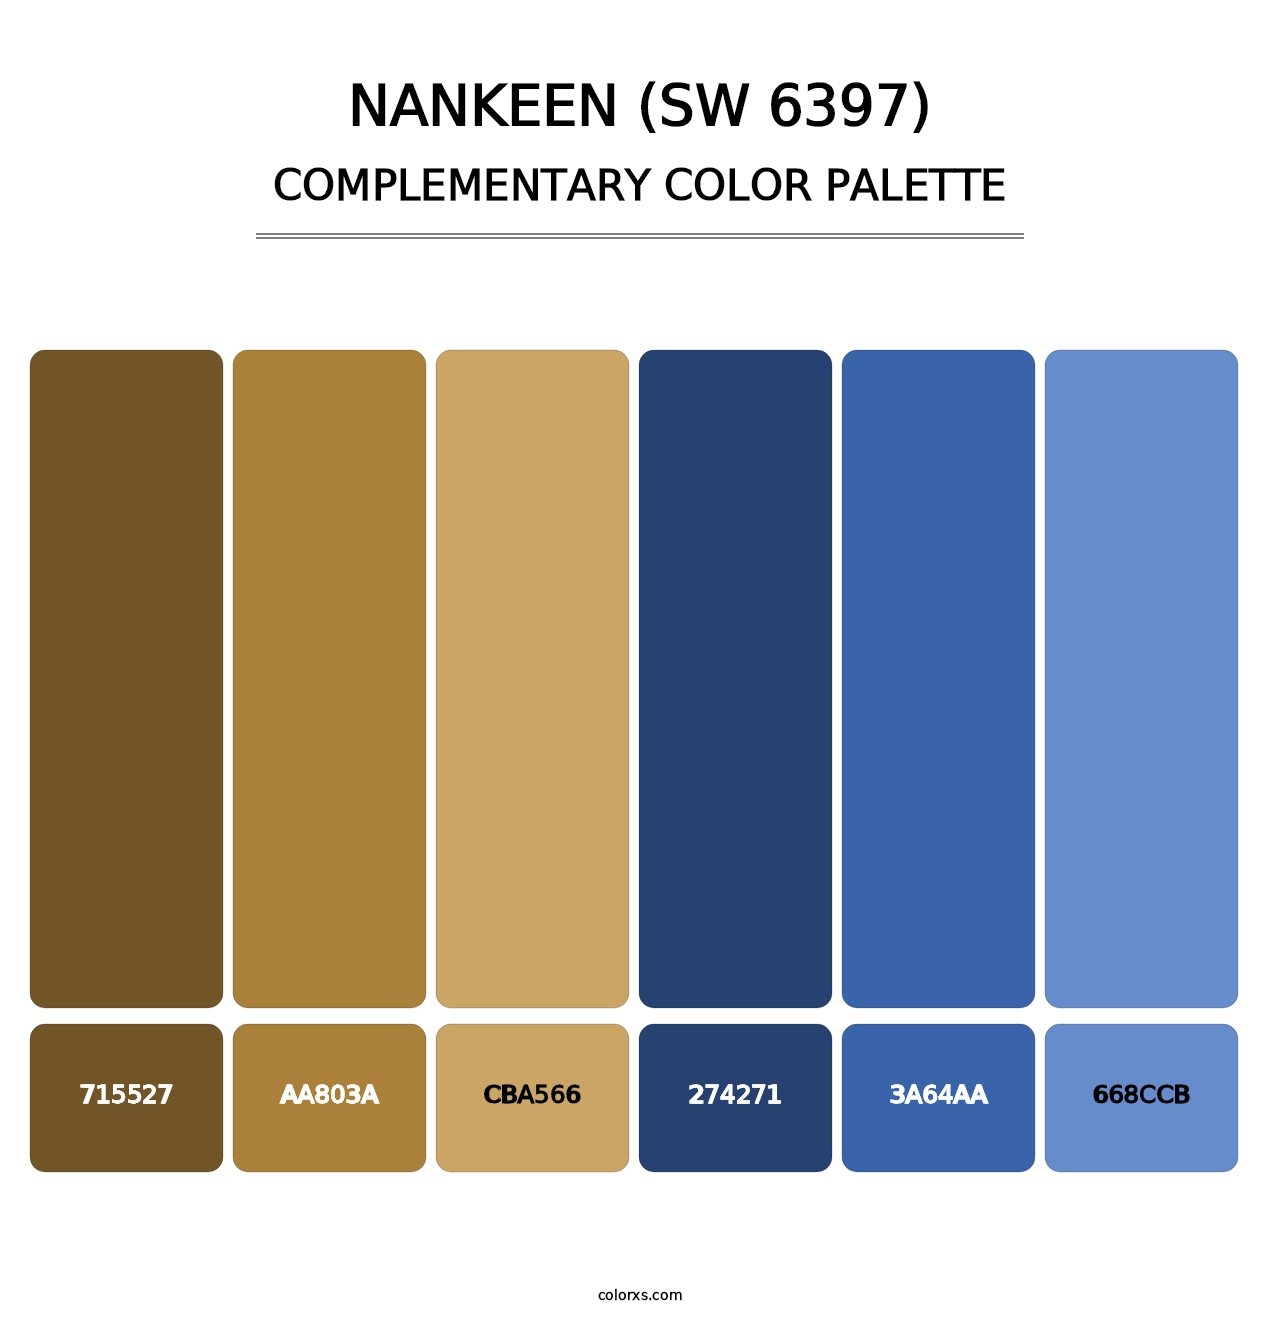 Nankeen (SW 6397) - Complementary Color Palette